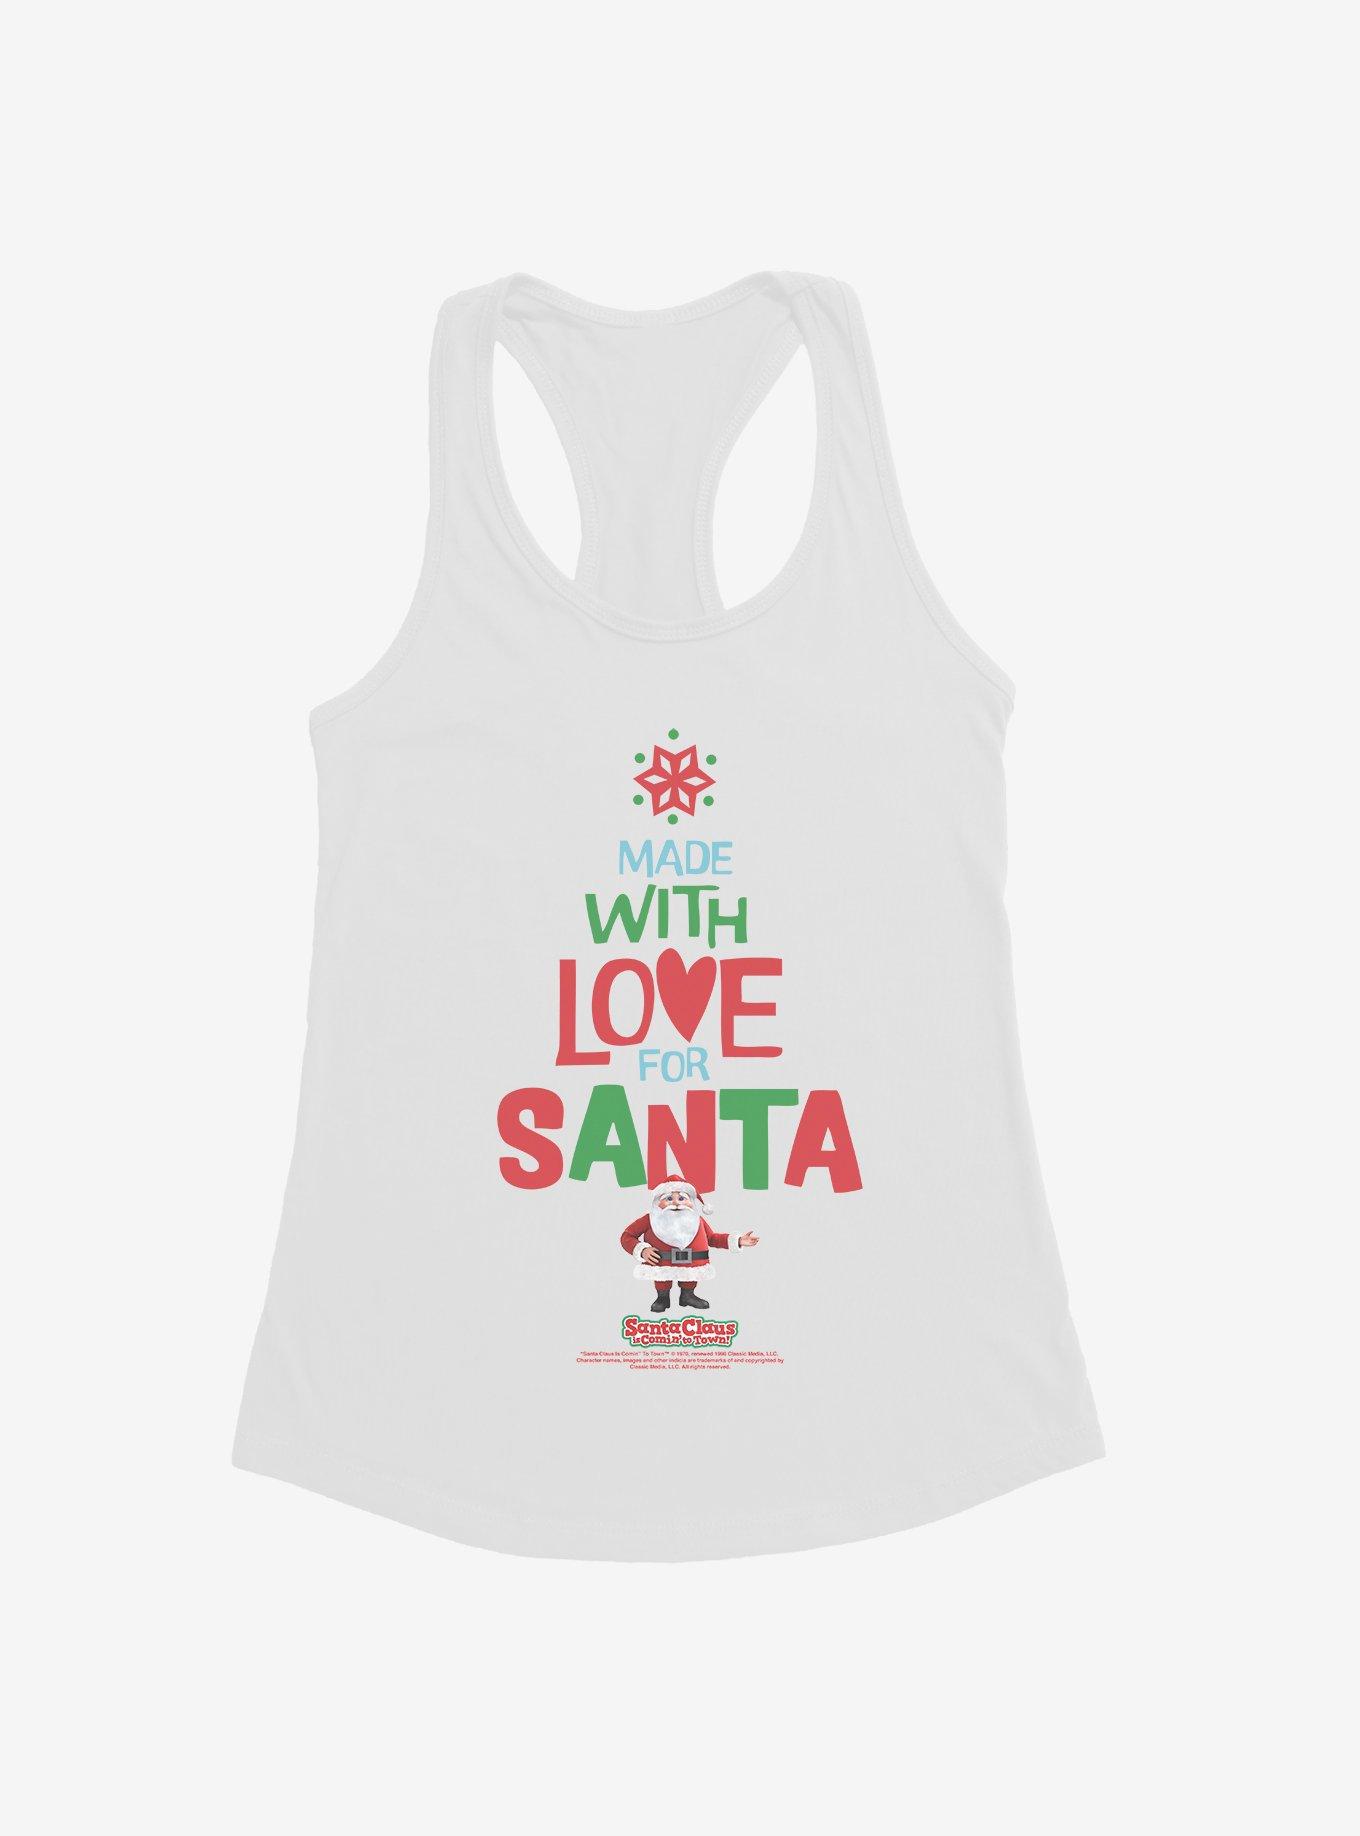 Santa Claus Is Comin' To Town! Made With Love For Santa Girls Tank, , hi-res